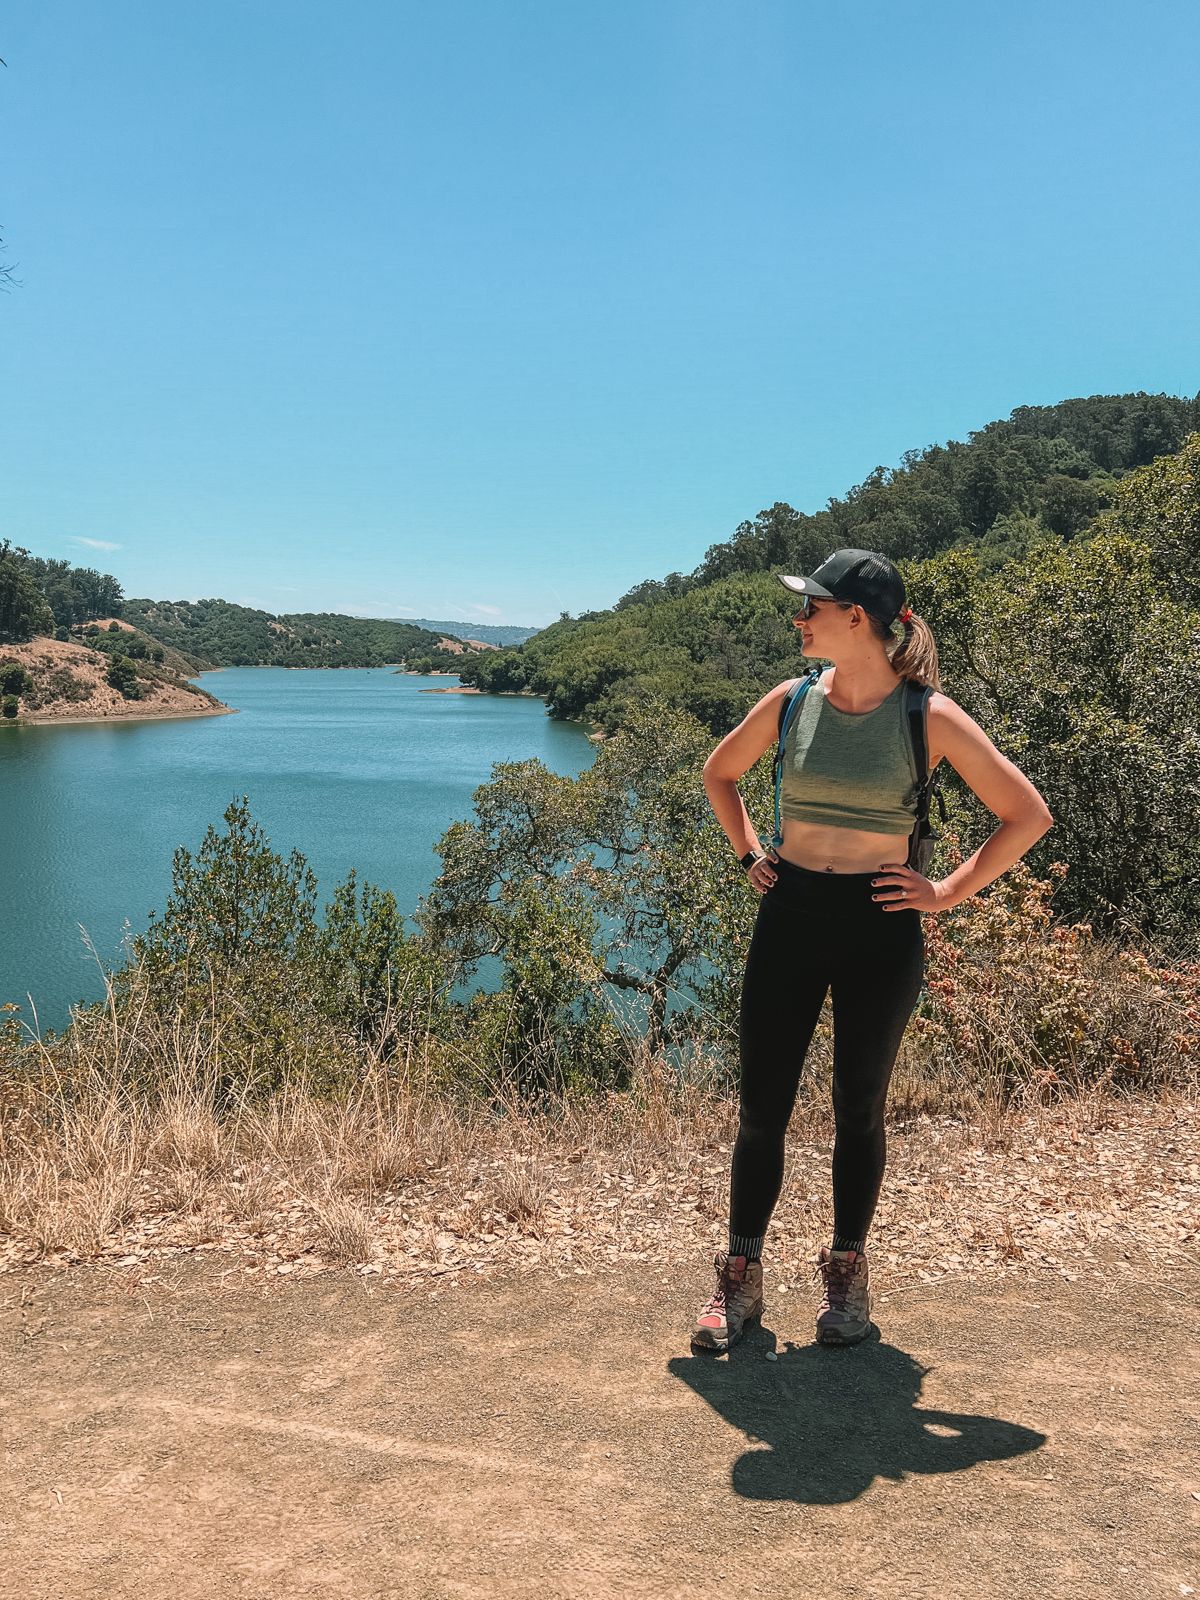 A woman hiker standing with her hands on her hips, looking at the lake to her right.